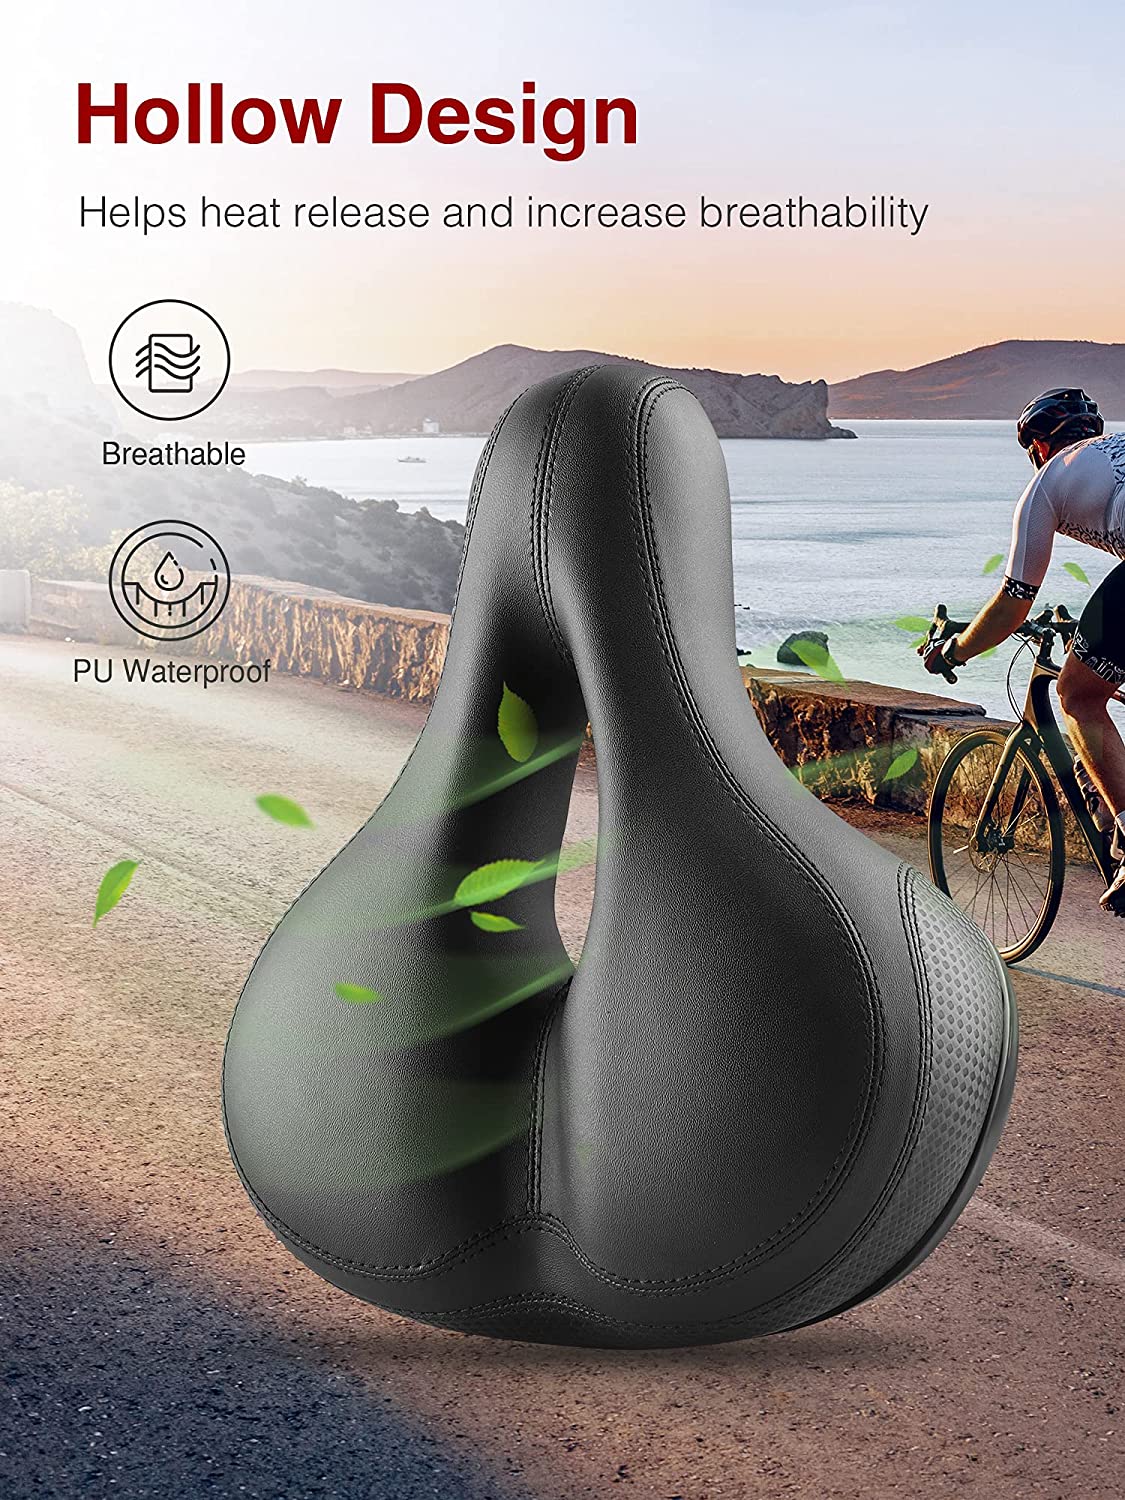 Choose a mountain bike saddle with cutouts to promote better blood circulation for more comfort on long rides.